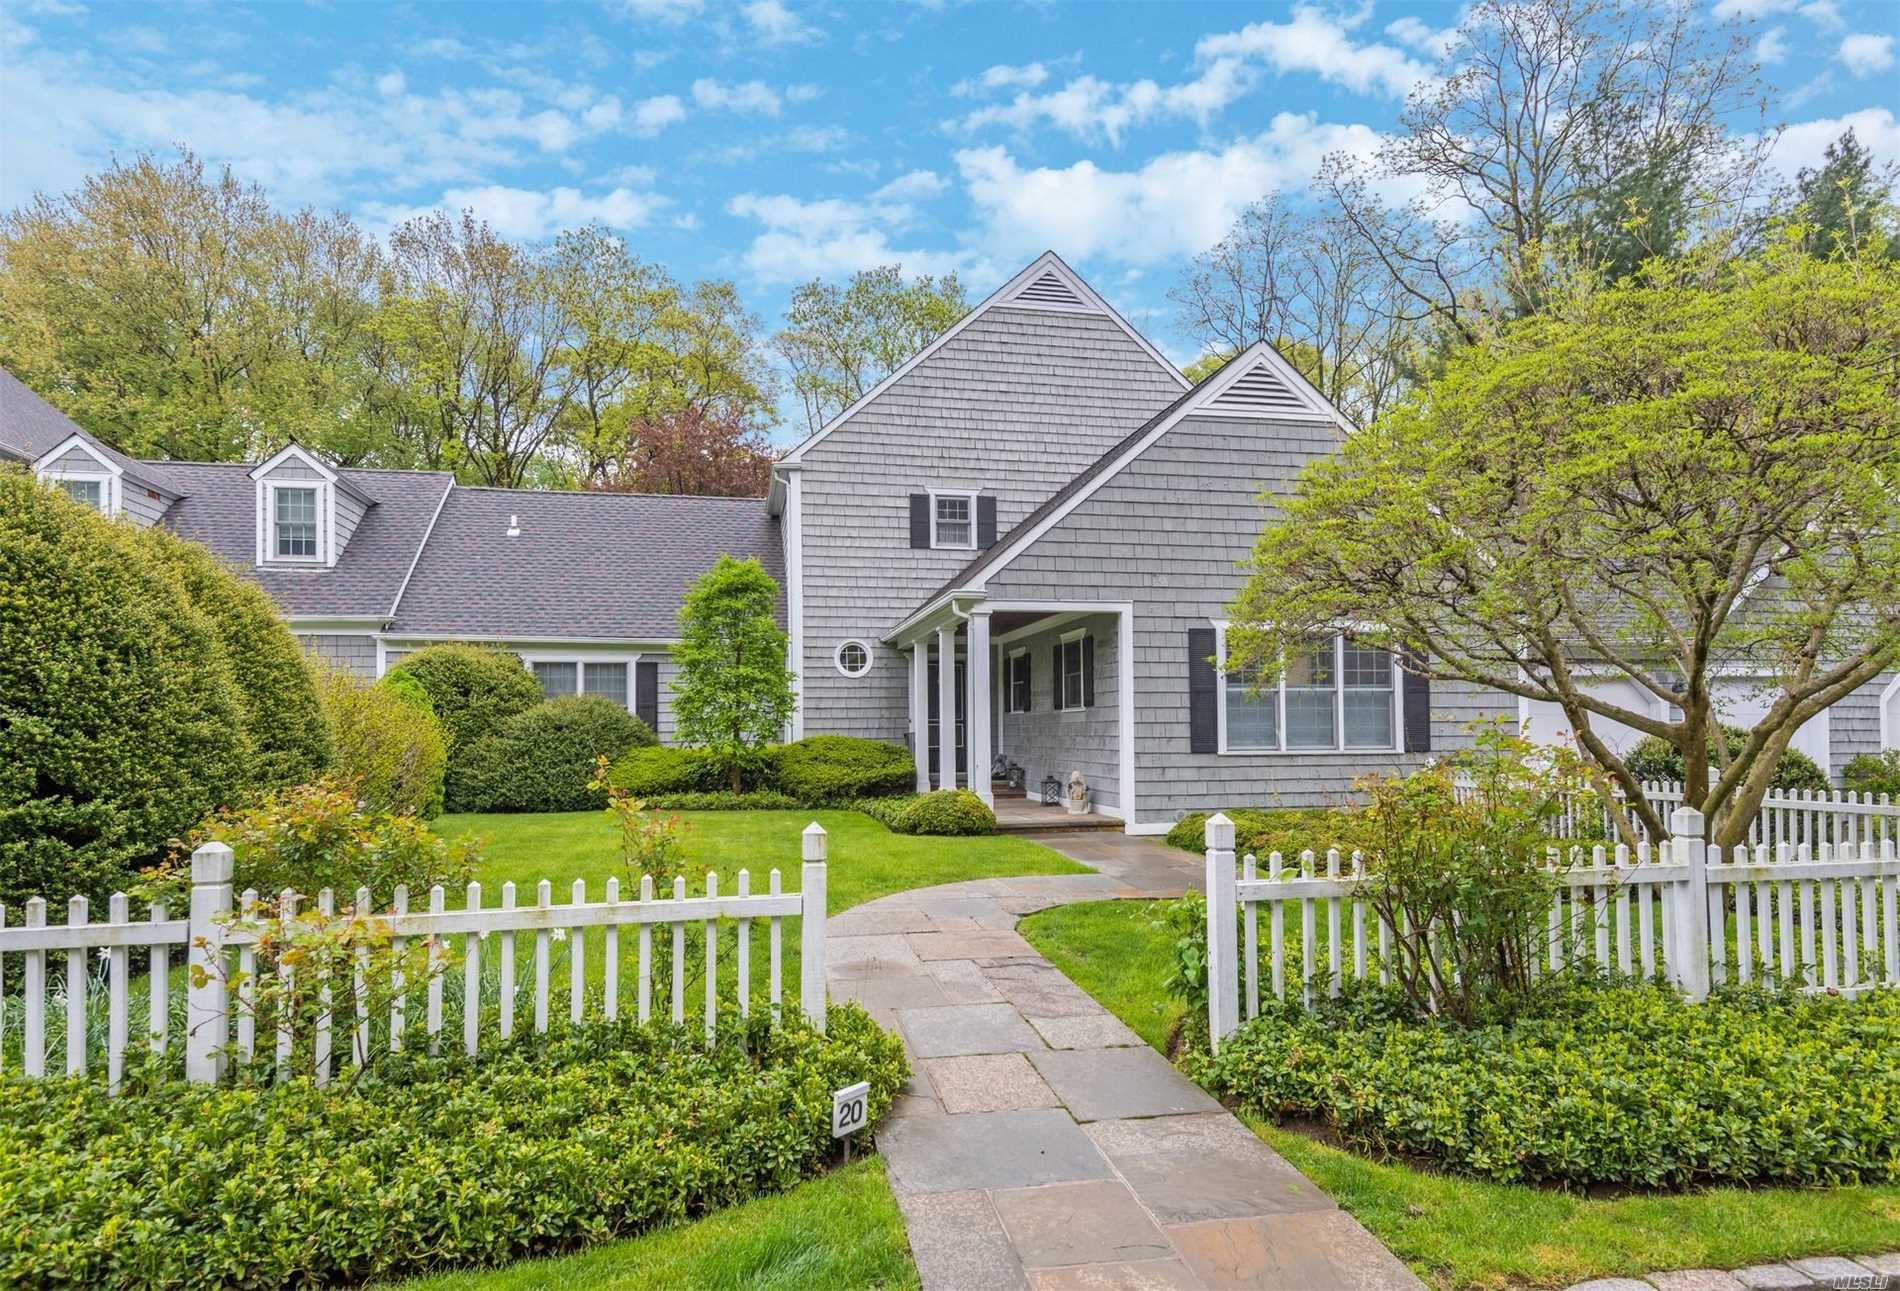 Renovated Nantucket style home with formal gardens, backing a preserve offering a serene and quiet setting. A gracious entrance and elegant entertaining rooms all overlooking wonderful gardens. Features include a new Gourmet Kitchen with walls of cabinetry, center island, calcutta marble countertop & top of the line appliances, service bar area to match, 2 Master Ensuite Bedrooms with new baths & spacious outfitted closets, 20 Kw Generator, 2013 Hot H20 Htr & Furnace, Updated roof, HOA